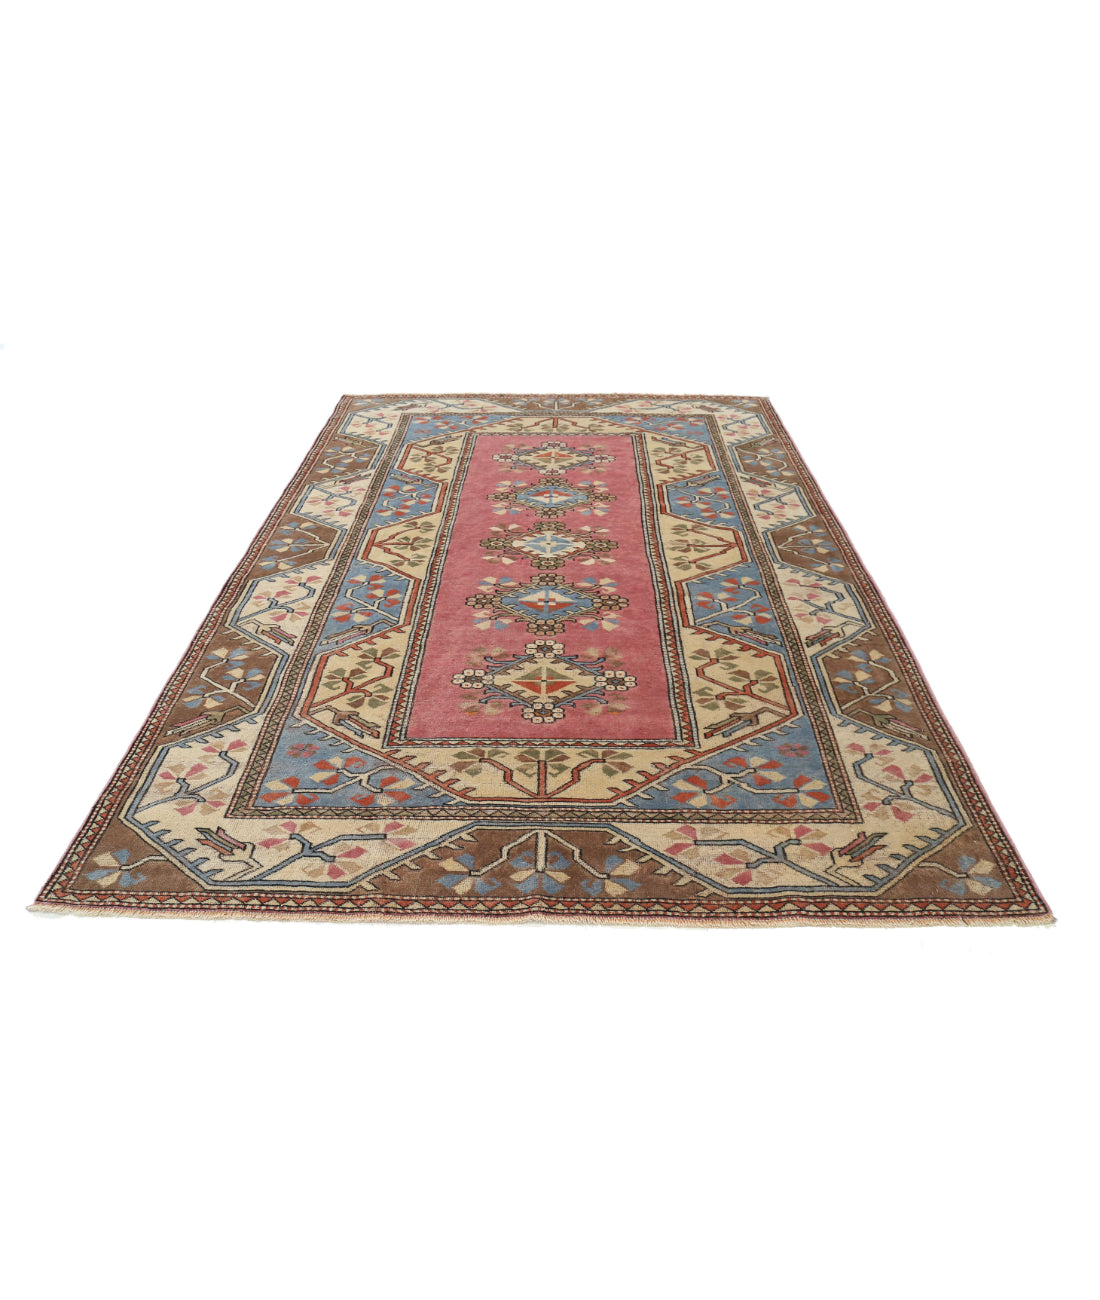 Hand Knotted Vintage Turkish Milas Wool Rug - 6'9'' x 9'3'' 6'9'' x 9'3'' (203 X 278) / Pink / Ivory